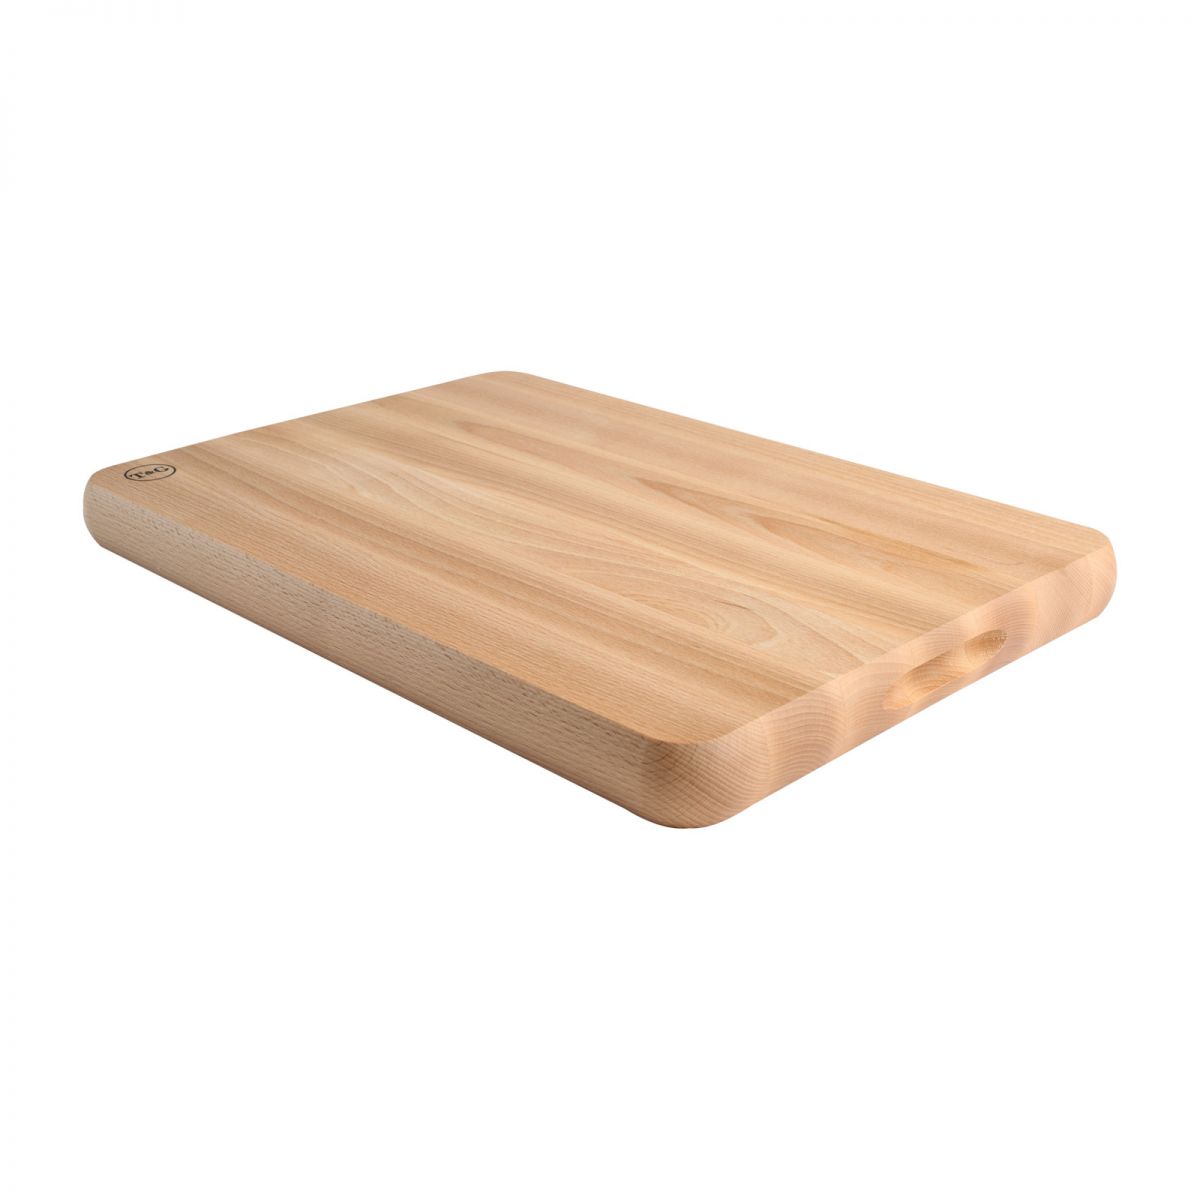 T&G Large TV Chefs Chopping Board 20x14 Inch